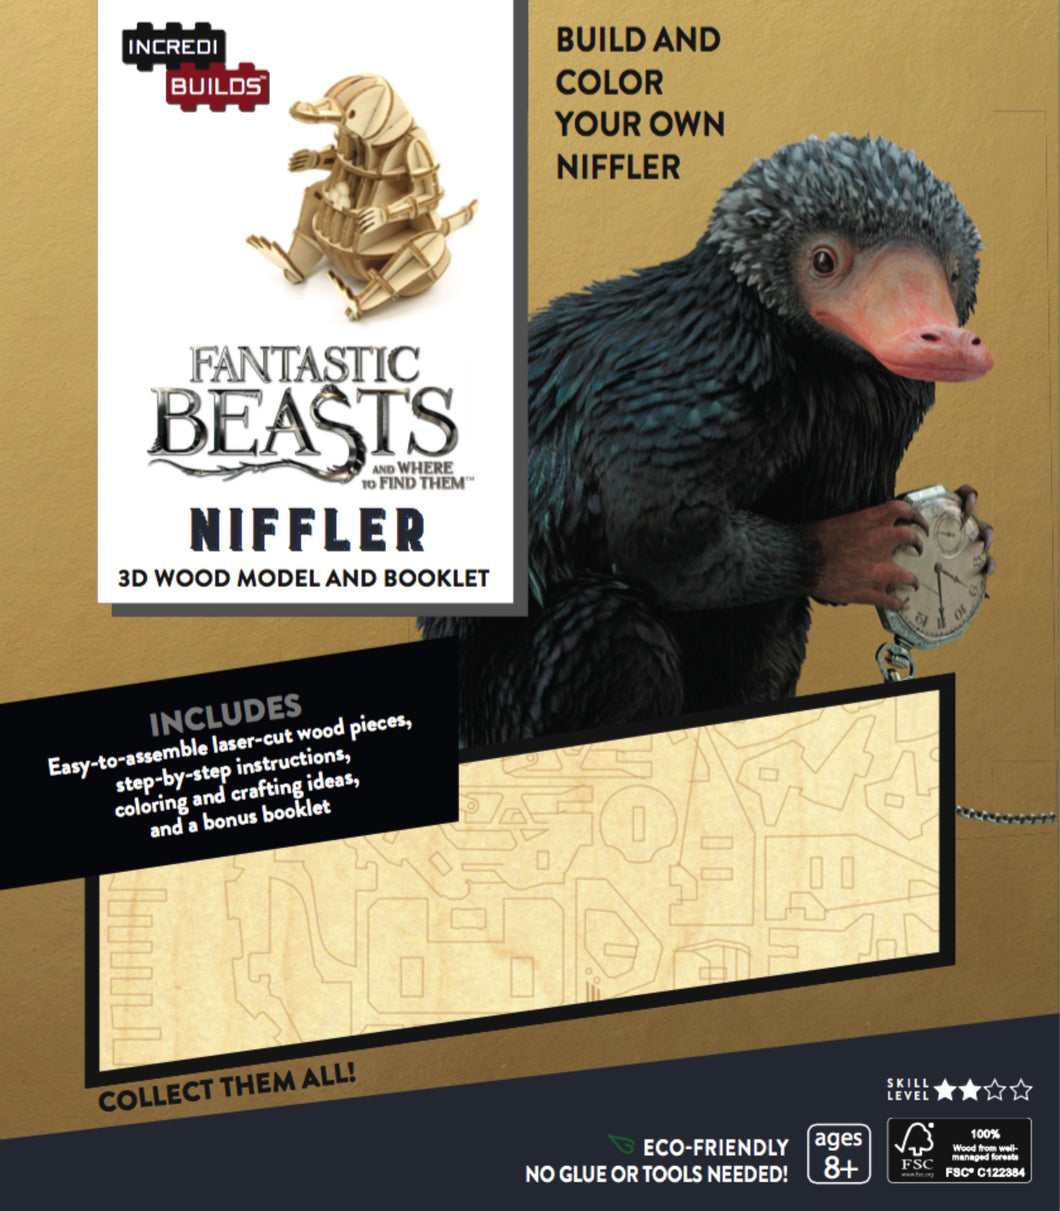 INCREDIBUILDS: FANTASTIC BEASTS AND WHERE TO FIND THEM: NIFFLER 3D WOOD MODEL AND BOOKLET